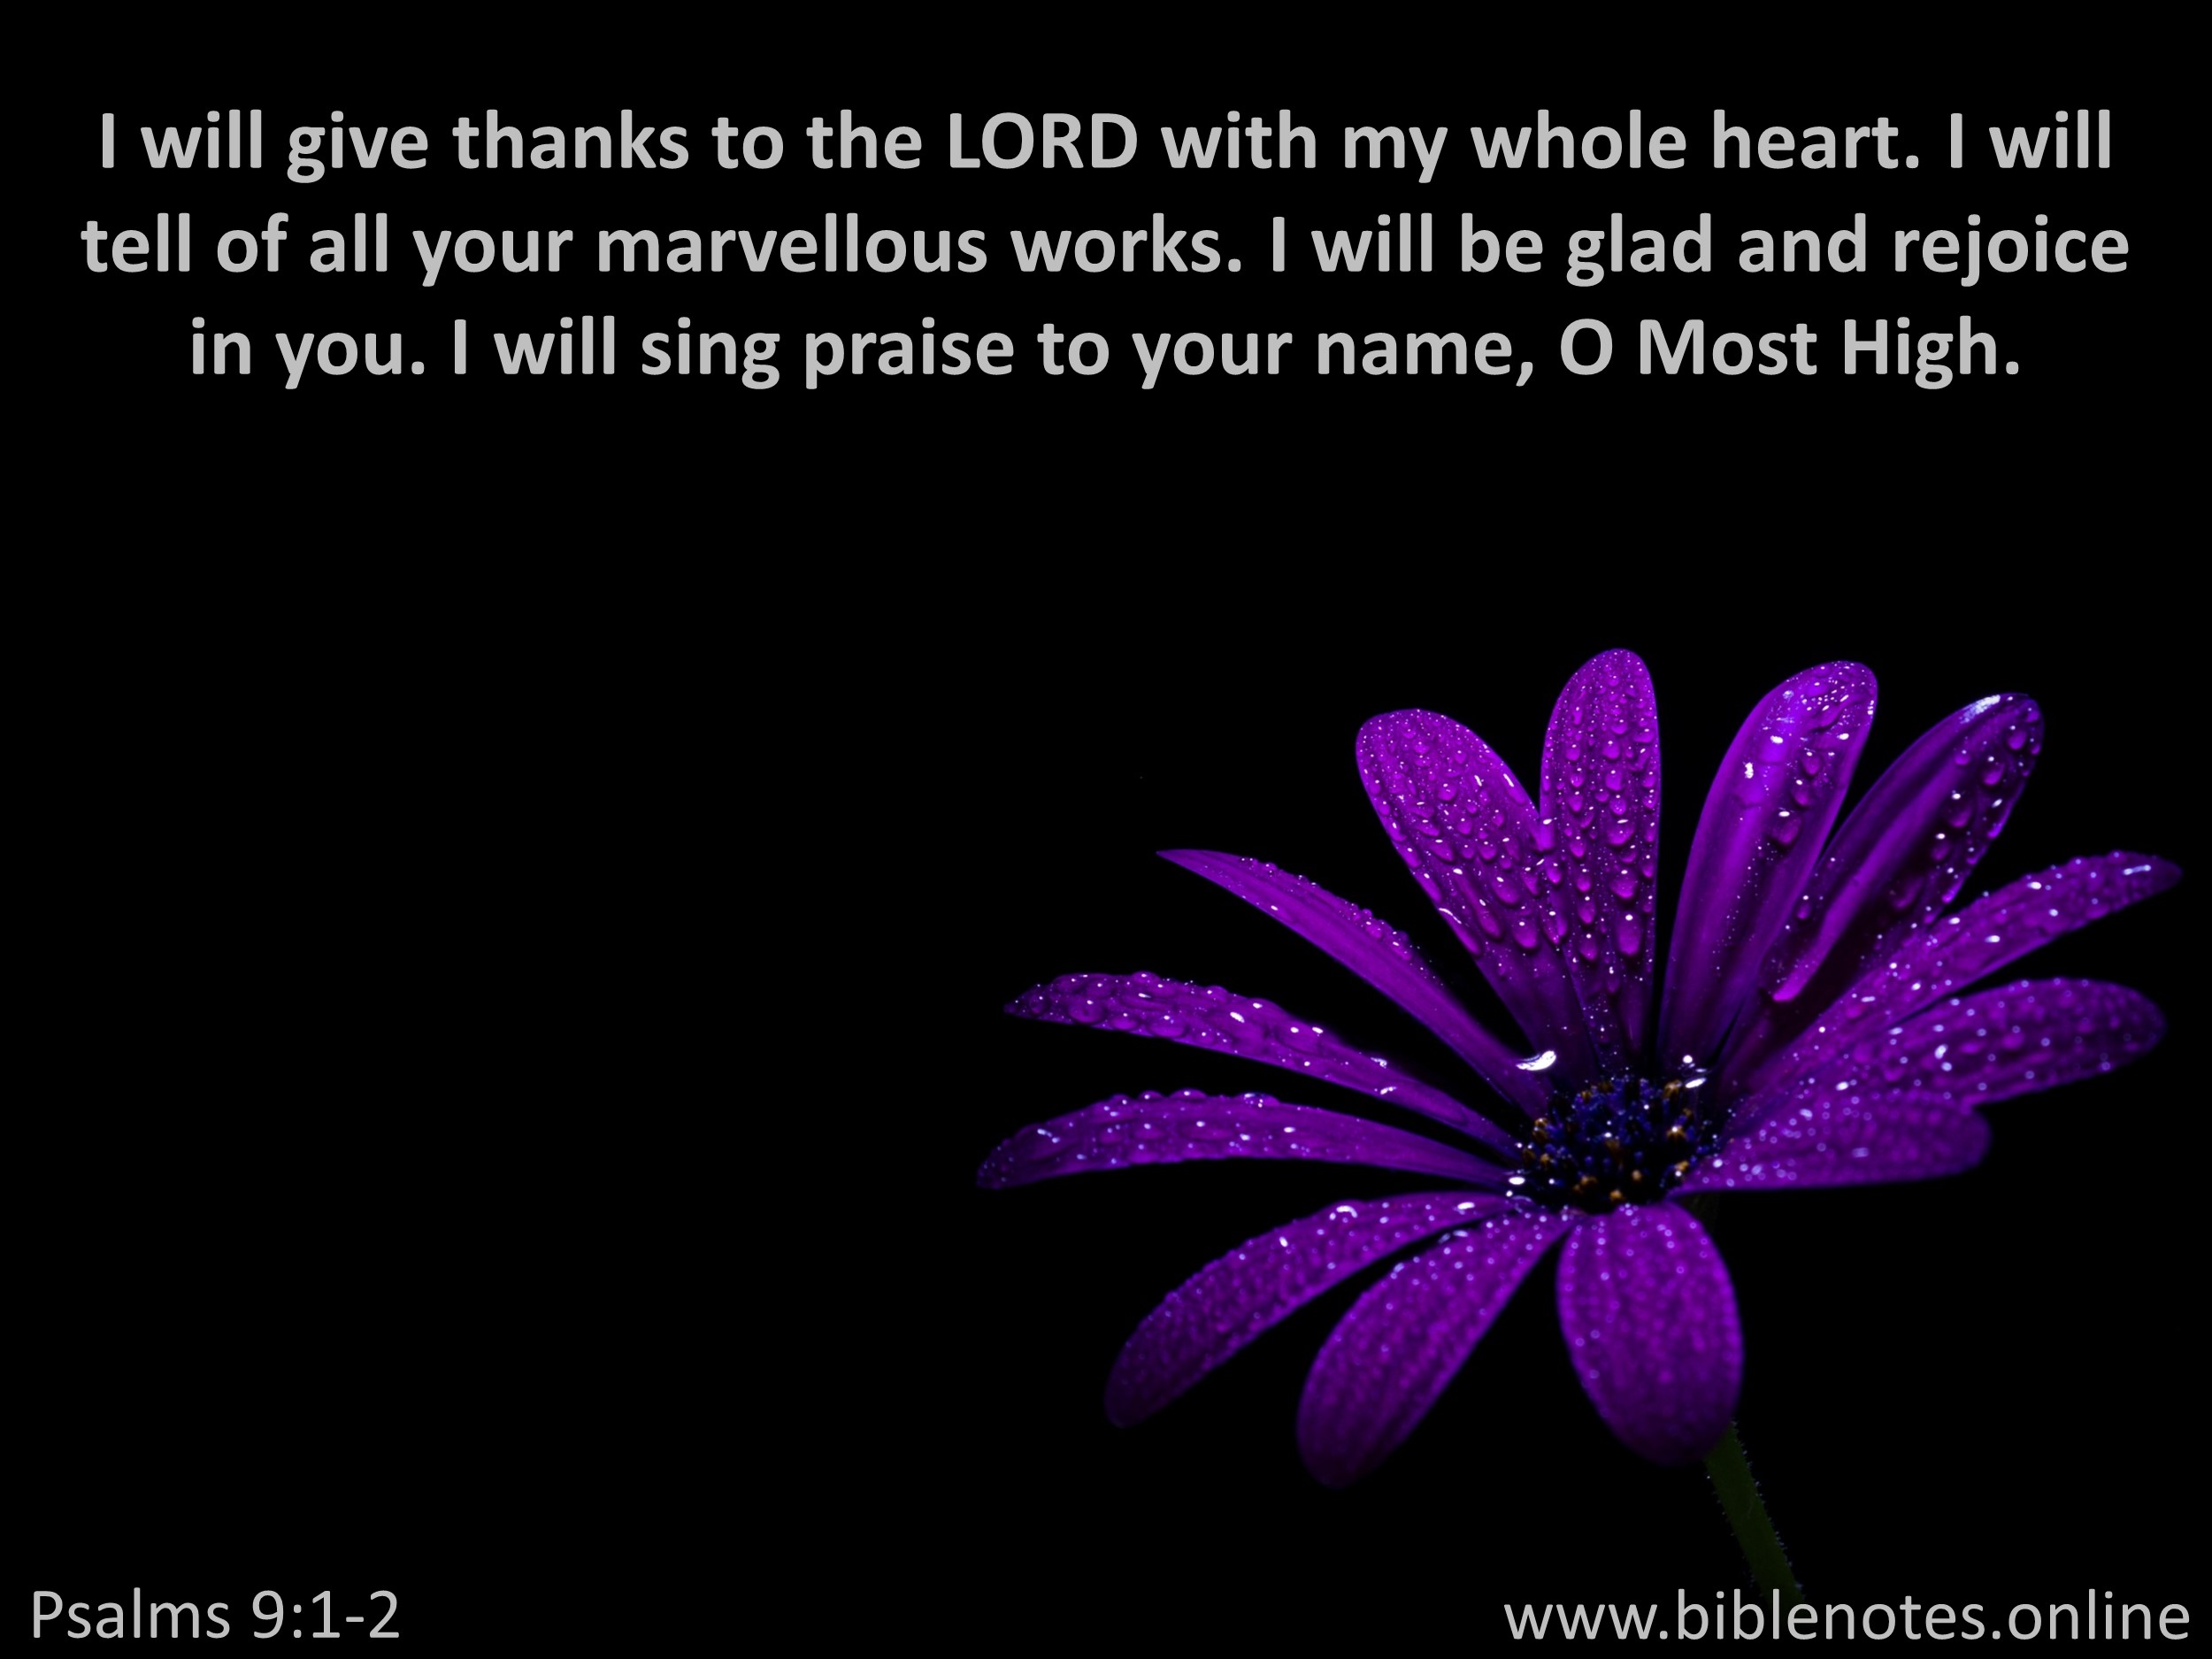 Bible Verse from Psalms Chapter 9